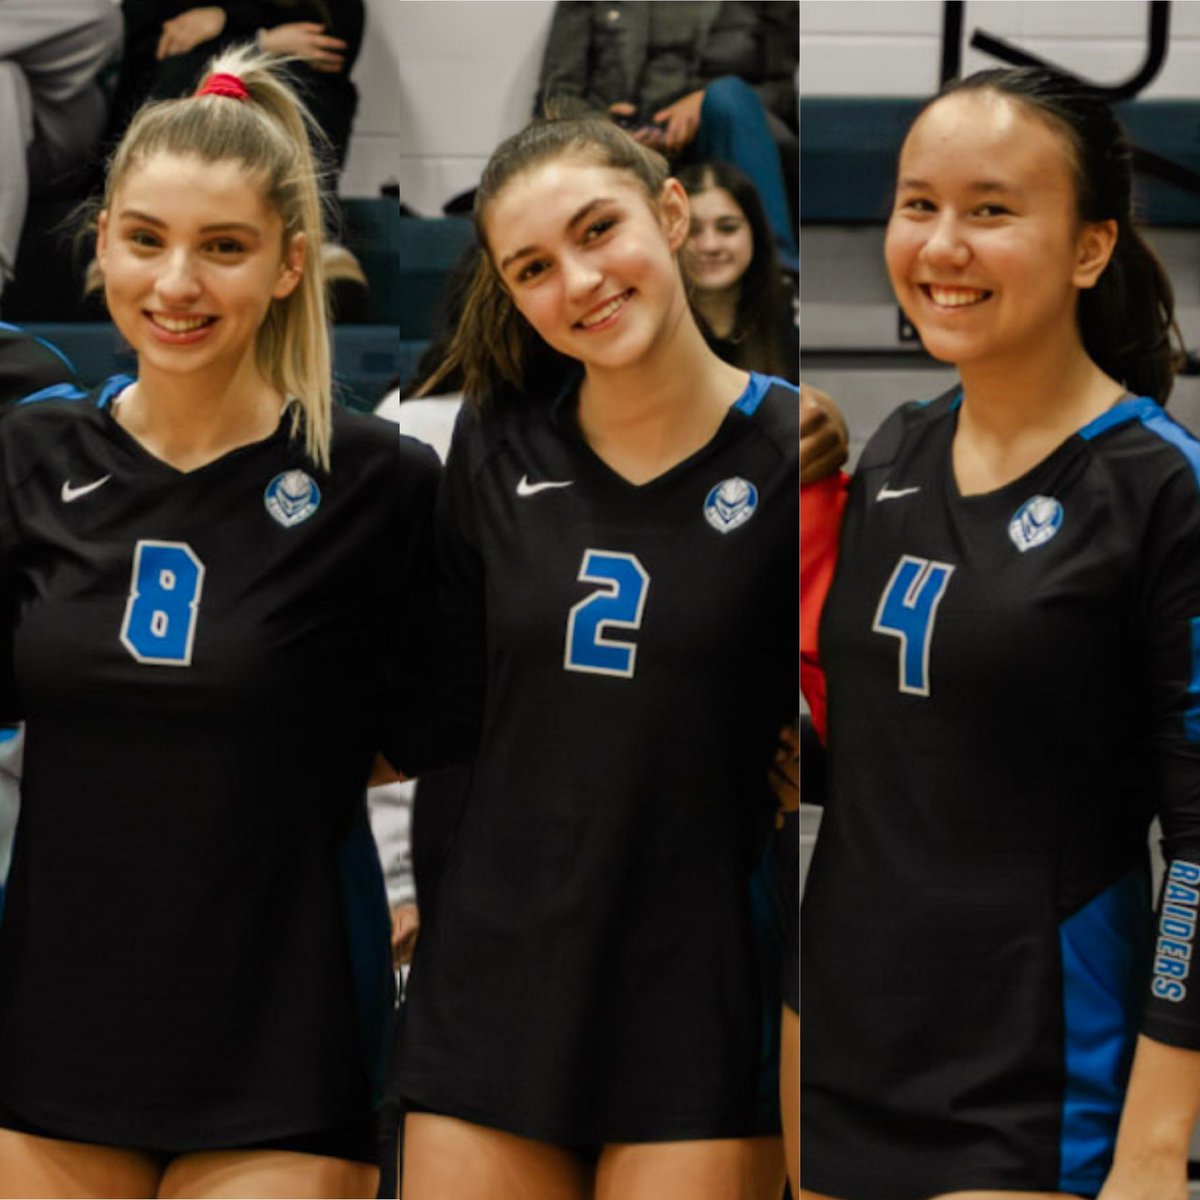 Leah Stevens #4 (S/OH/OPP): 2nd TEAM ALL COUNTY, HONORABLE MENTION ALL CONFERENCE Hana Berisha #8 (S) and Madelyn Byrne #2 (OH) 3rd TEAM ALL COUNTY, HONORABLE MENTION ALL CONFERENCE